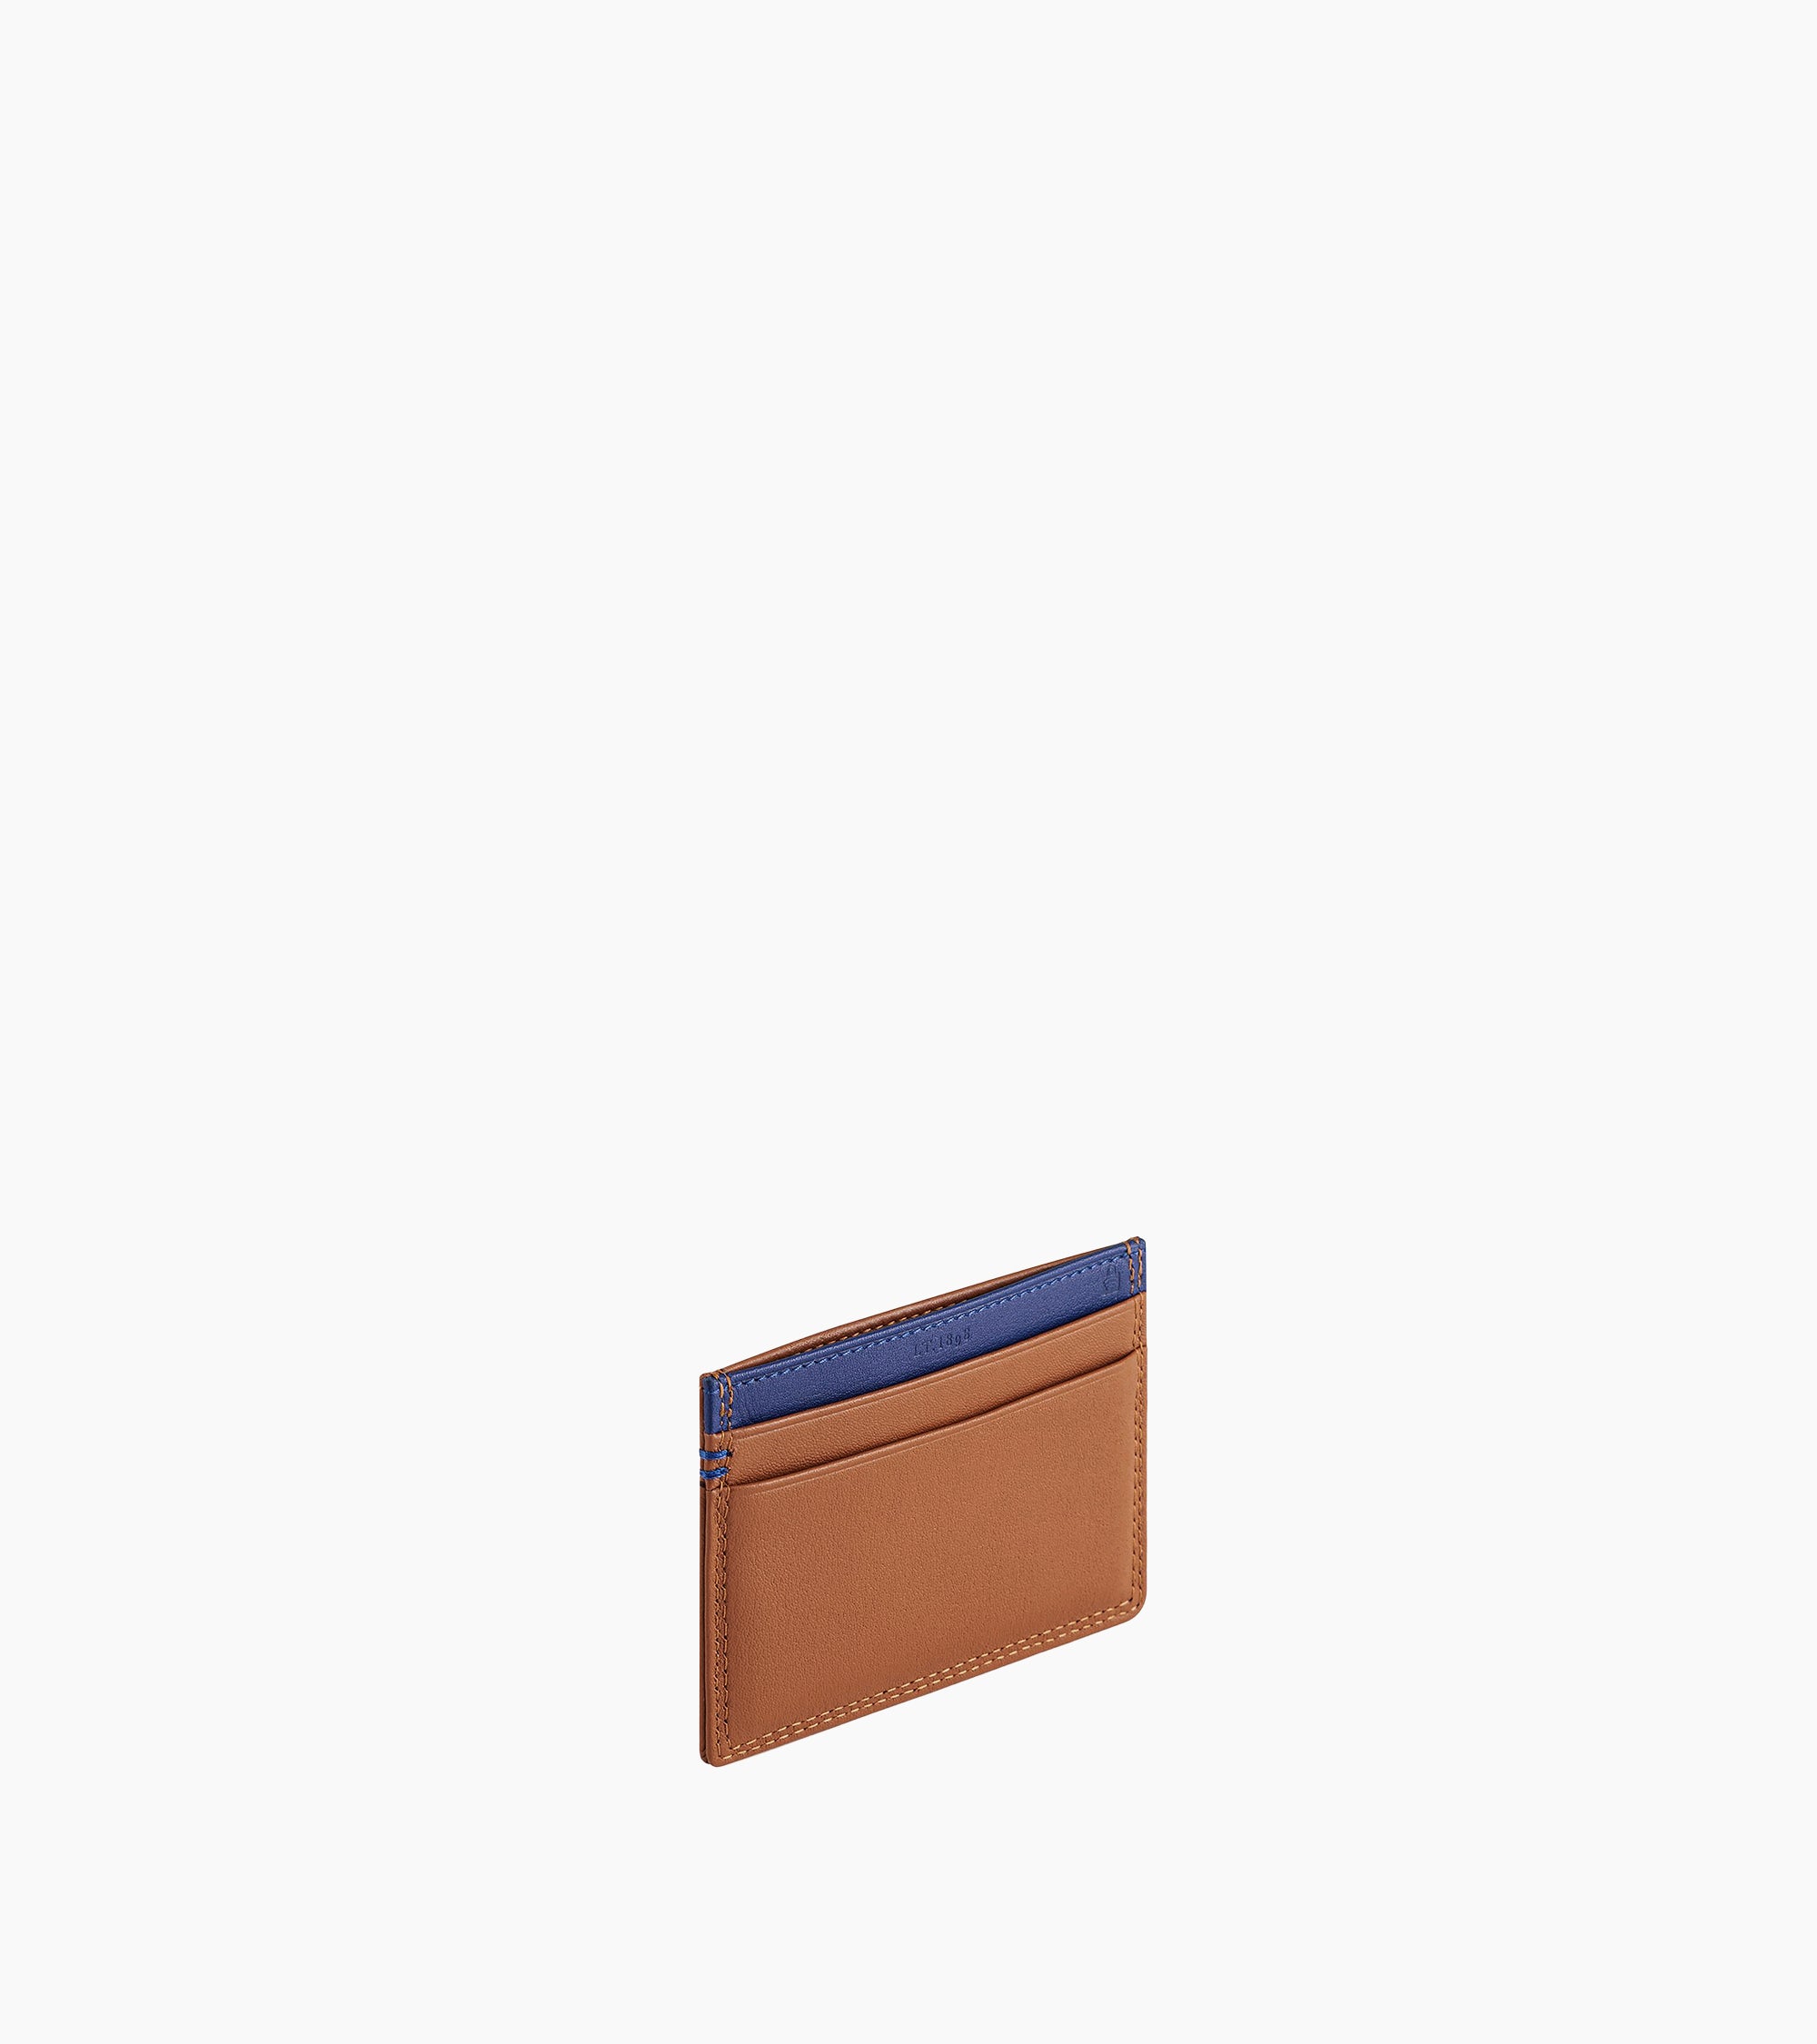 Martin card holder in smooth leather